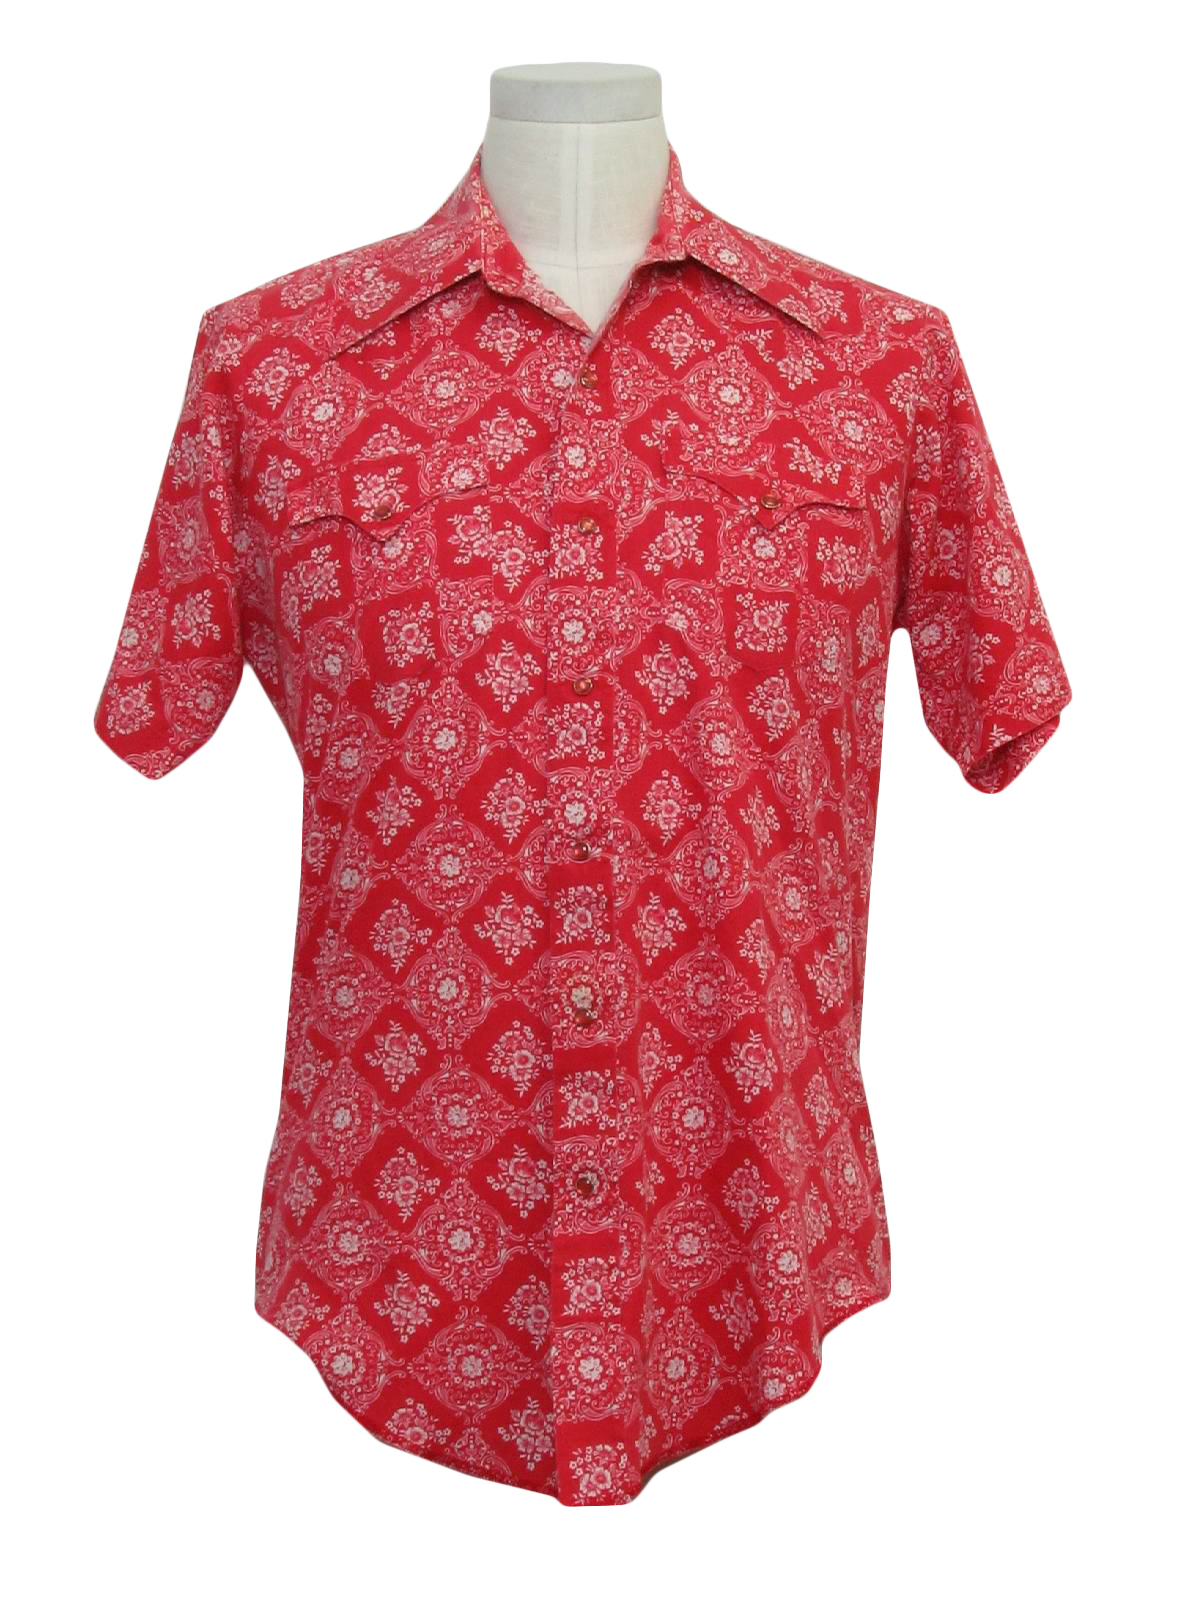 Vintage 70s Western Shirt: 70s -Karman- Mens red and white floral print ...